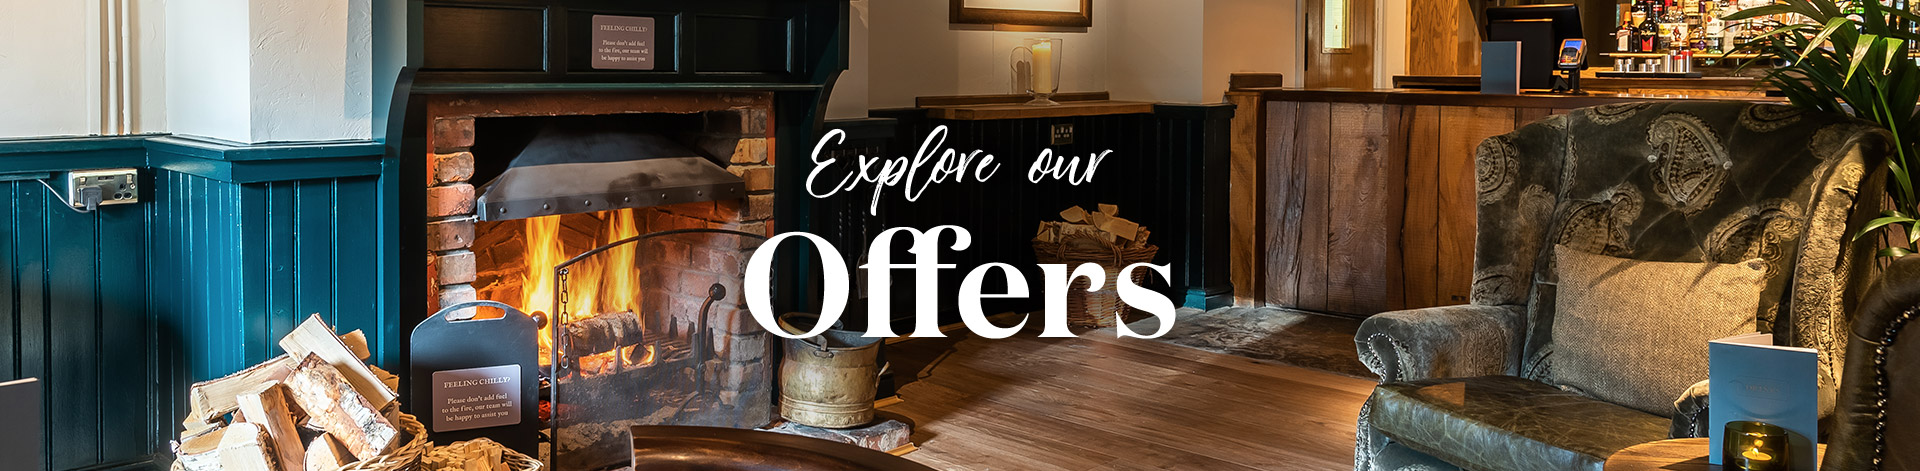 Our latest offers at The Cuckmere Inn